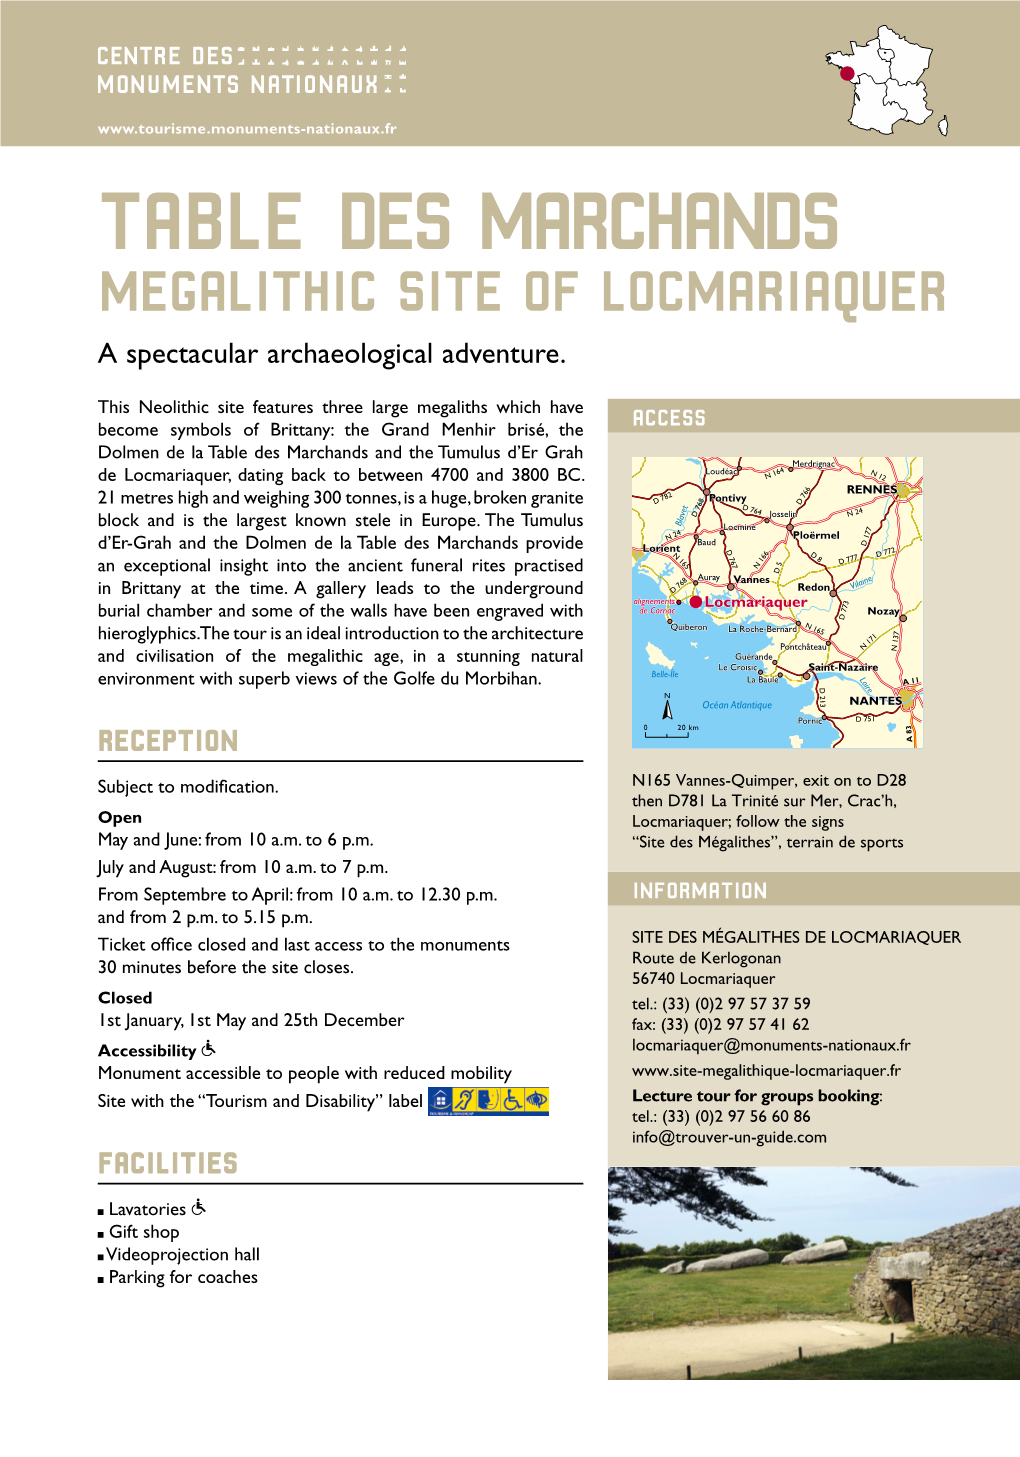 MEGALITHIC SITE of LOCMARIAQUER a Spectacular Archaeological Adventure